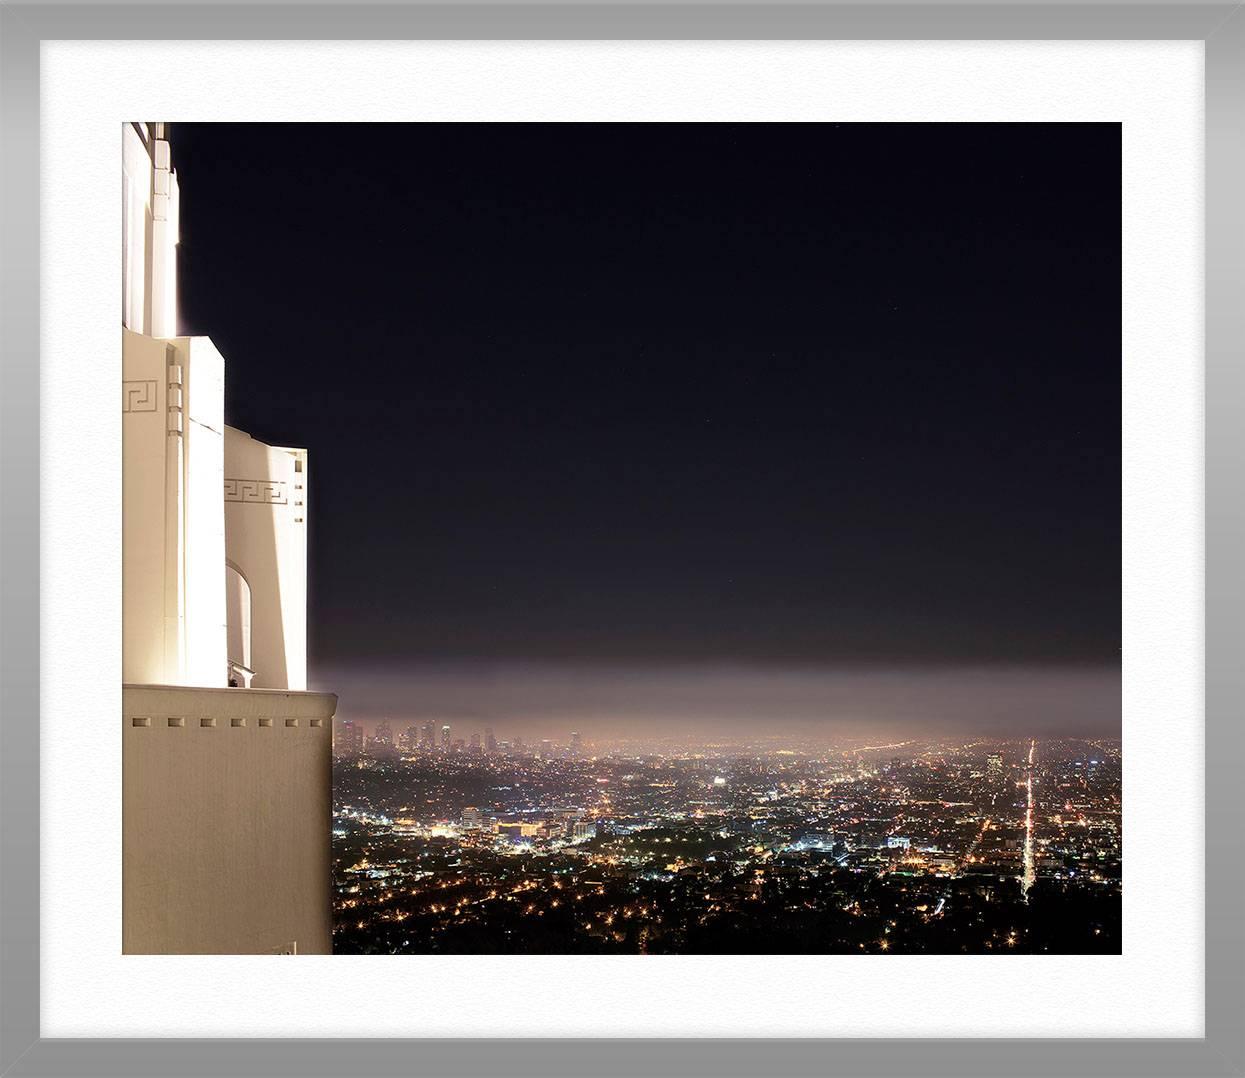 Los Angeles, Griffith Observatory 2 3